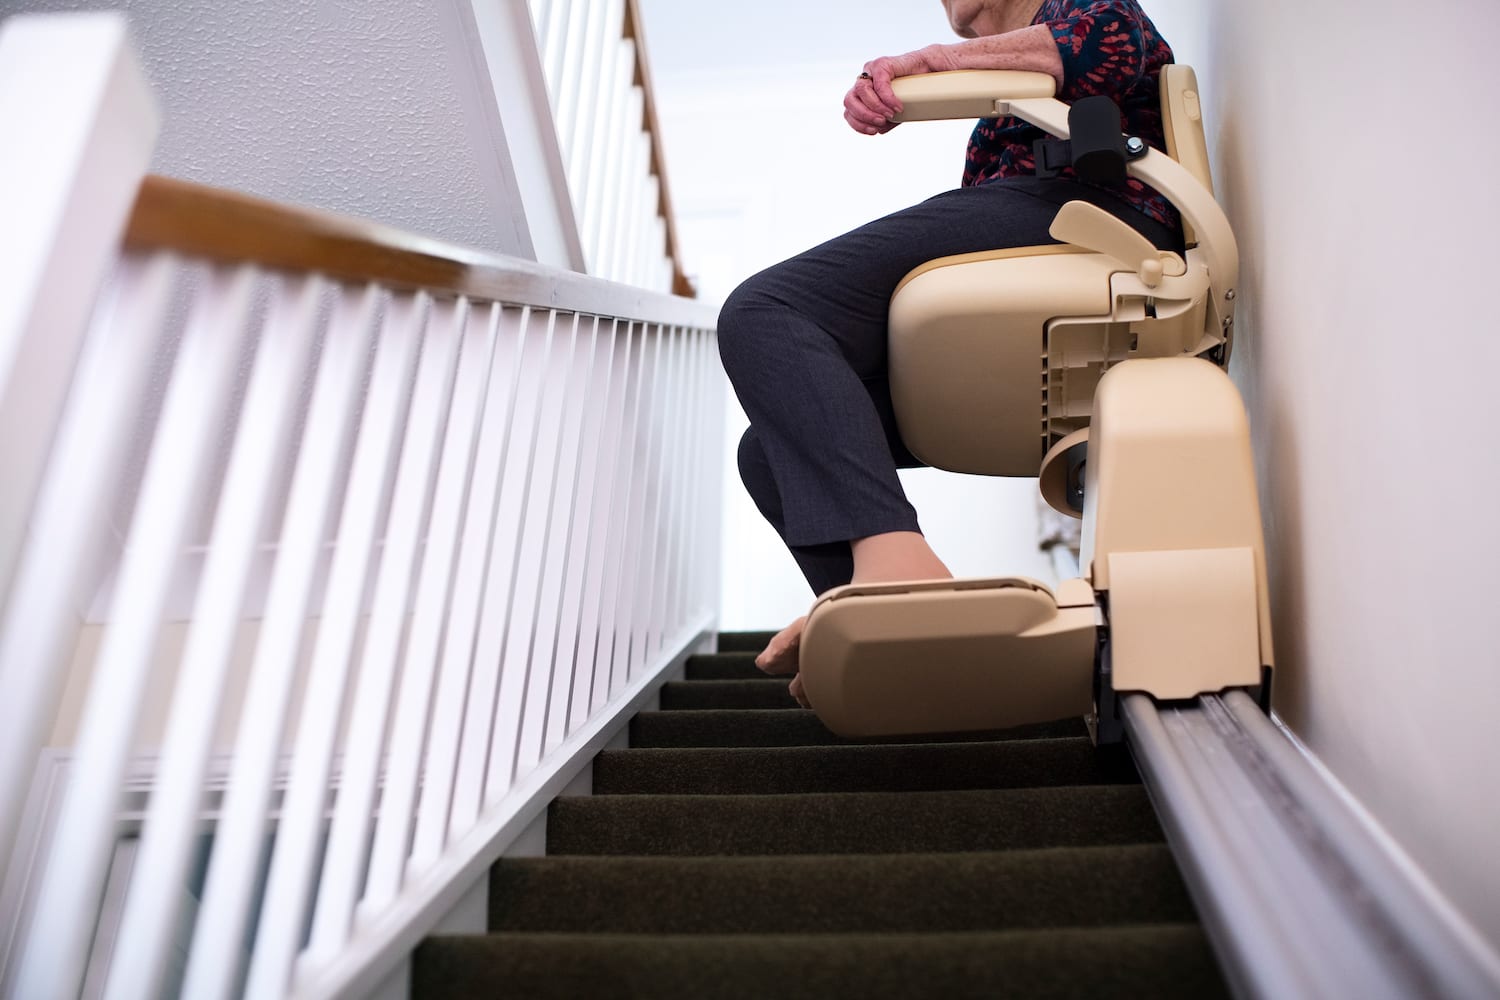 Image of woman sitting in stair lift going up the stairs